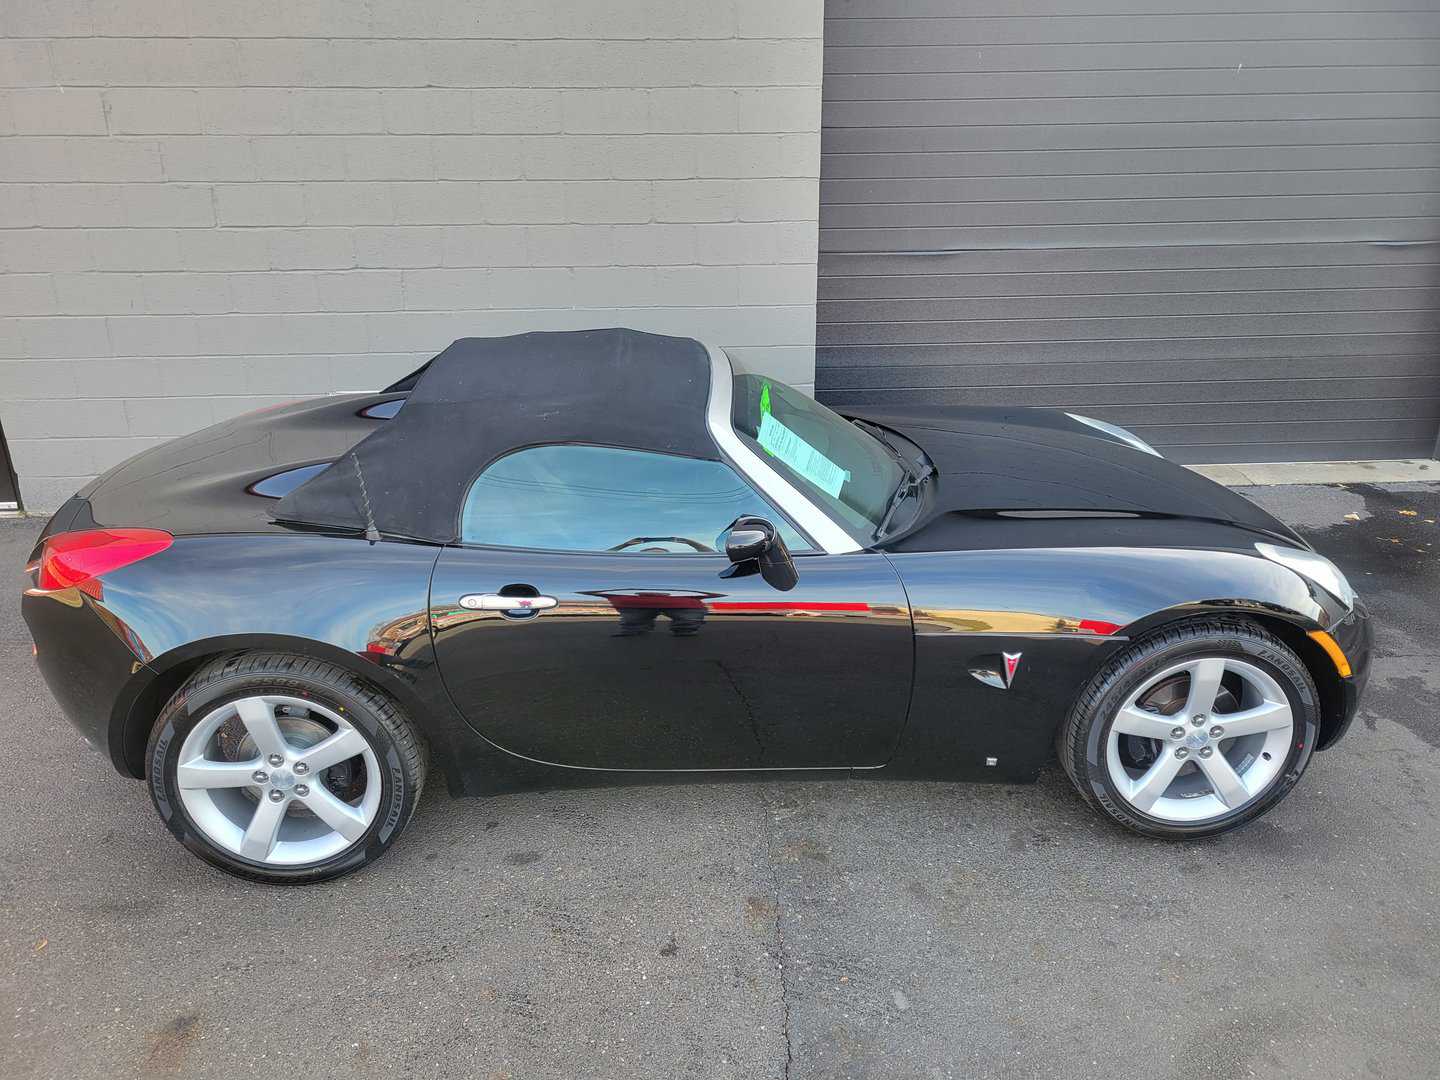 A 2006 Black Pontiac Solstice Sports Car Parked In Front Of A Garage.